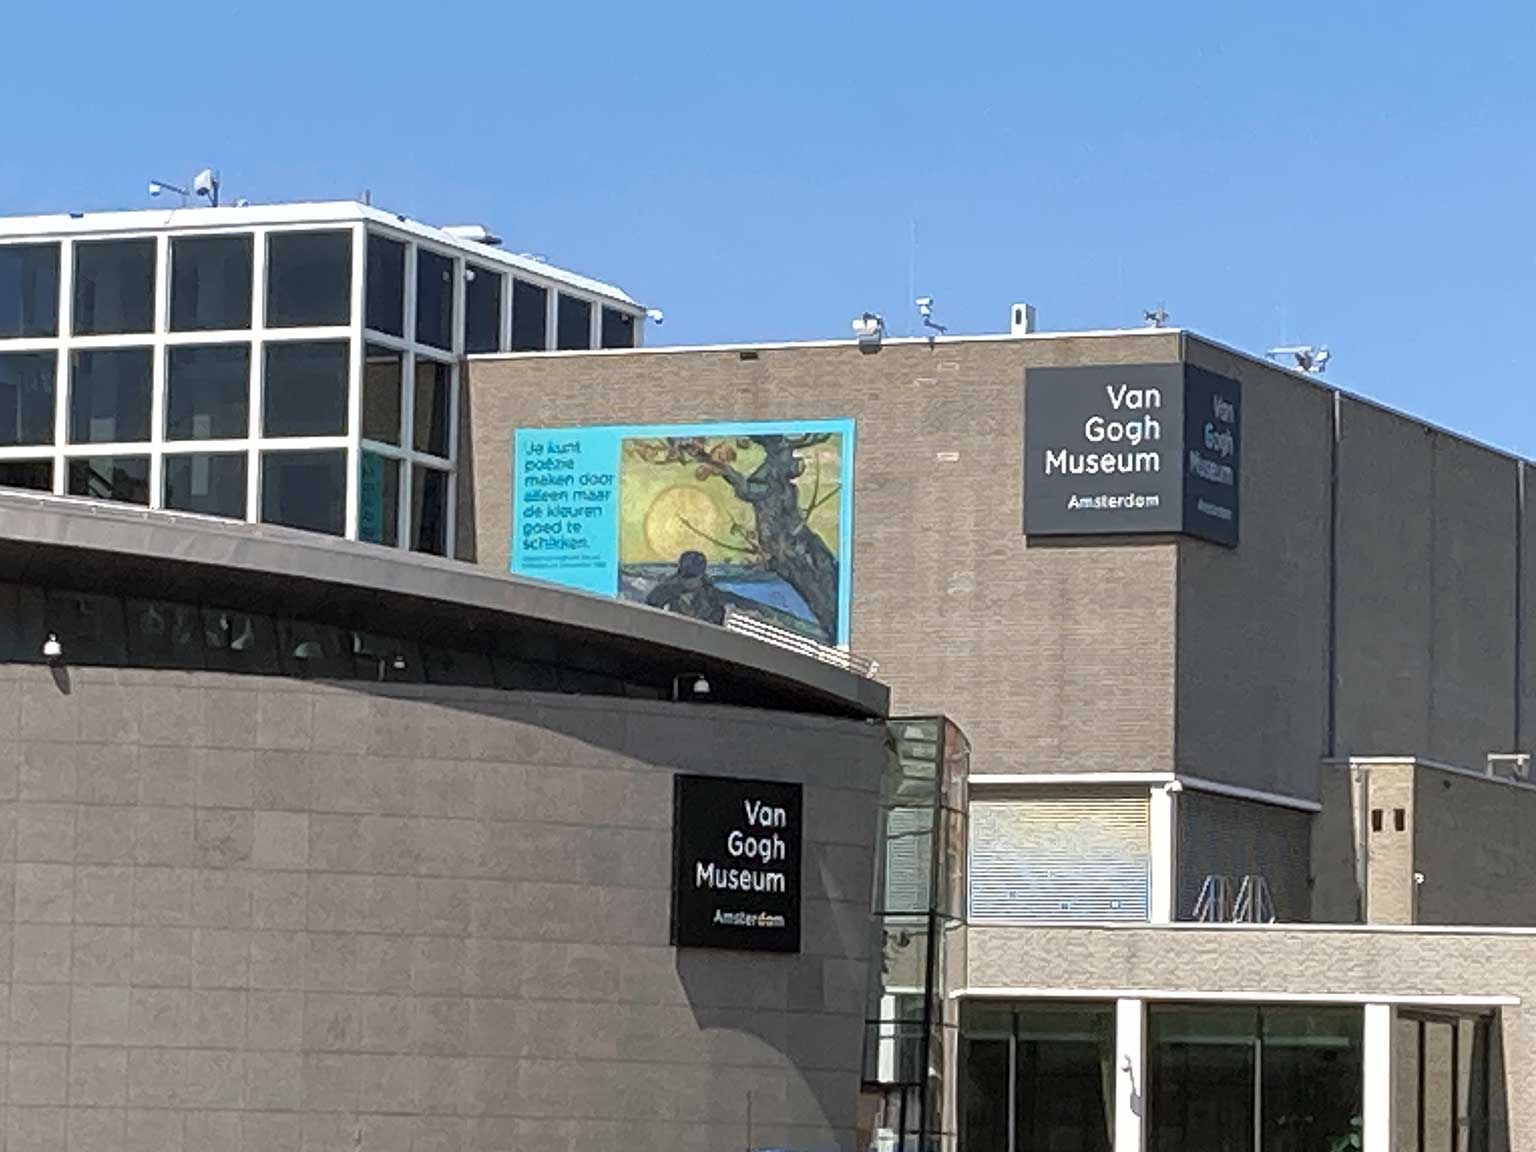 Van Gogh museum, Amsterdam, the new wing with the old building behind it